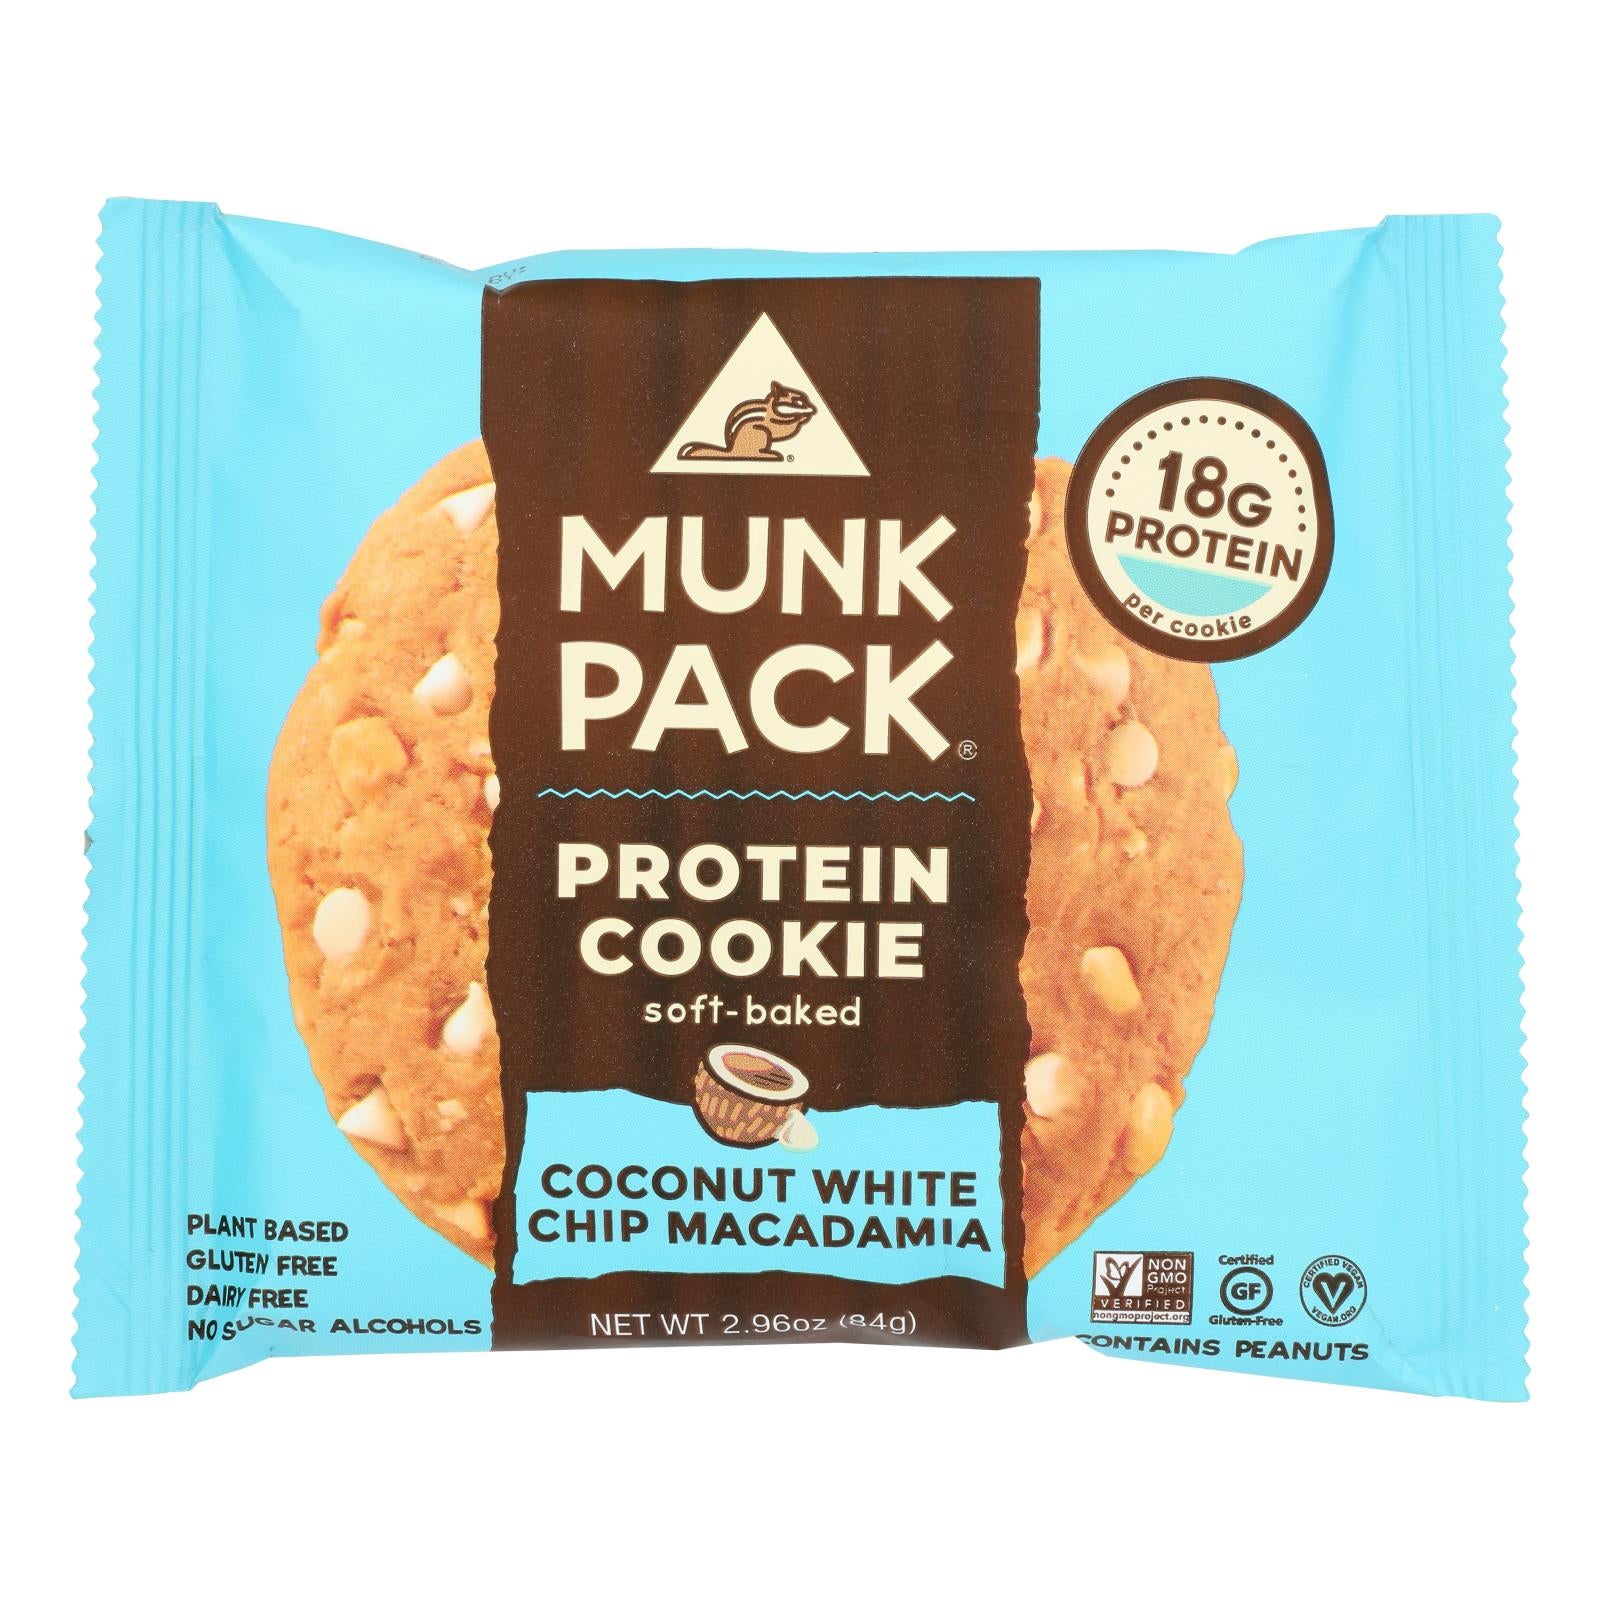 Munk Pack - Protein Cookie - Coconut White Chocolate Chip Macadamia - Quantity: 6